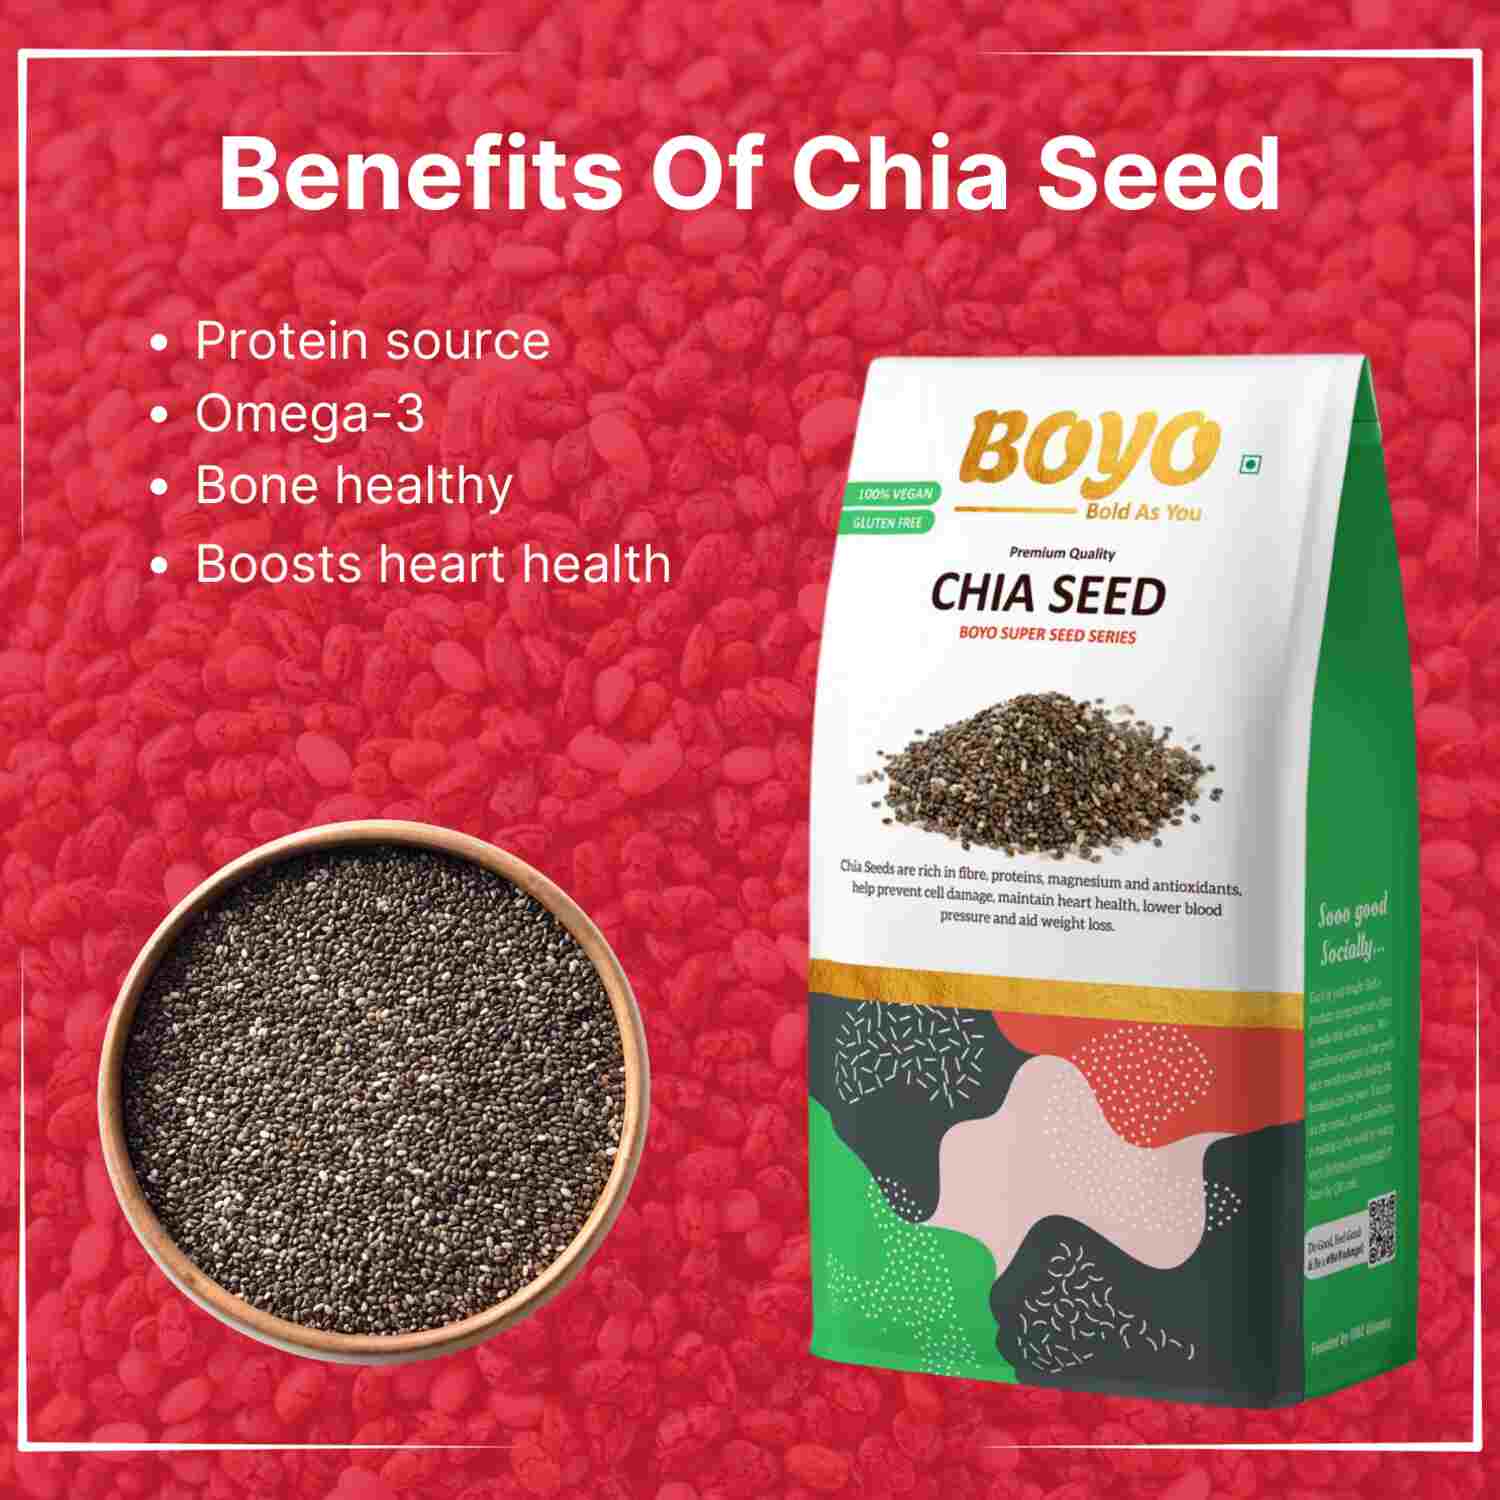 Super Healthy Seeds Combo Pack 750g - Raw Chia Seed 250g, Raw Flax Seed 250g and Raw Sunflower Seed 250g